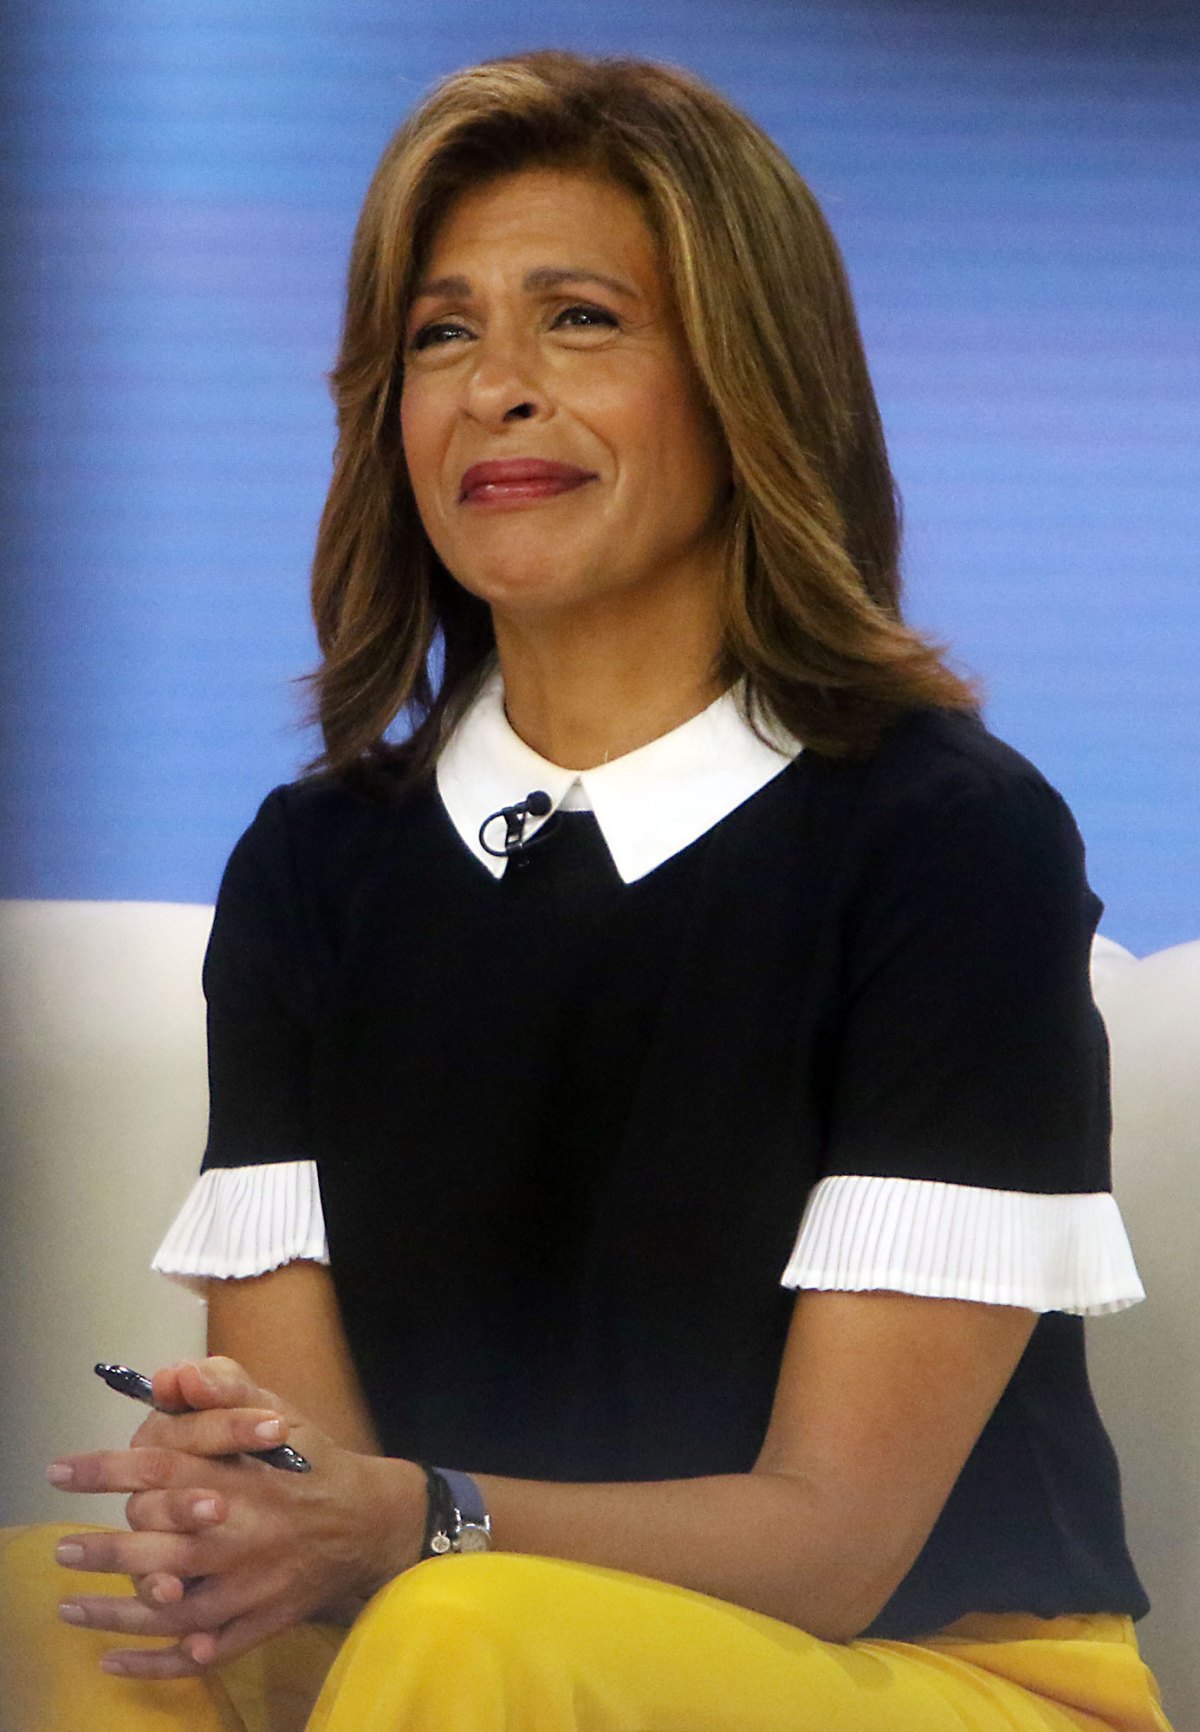 Hoda Kotb Makes Pre-Taped Appearance on 'Today' Amid Continued Absence From Live Show white collar